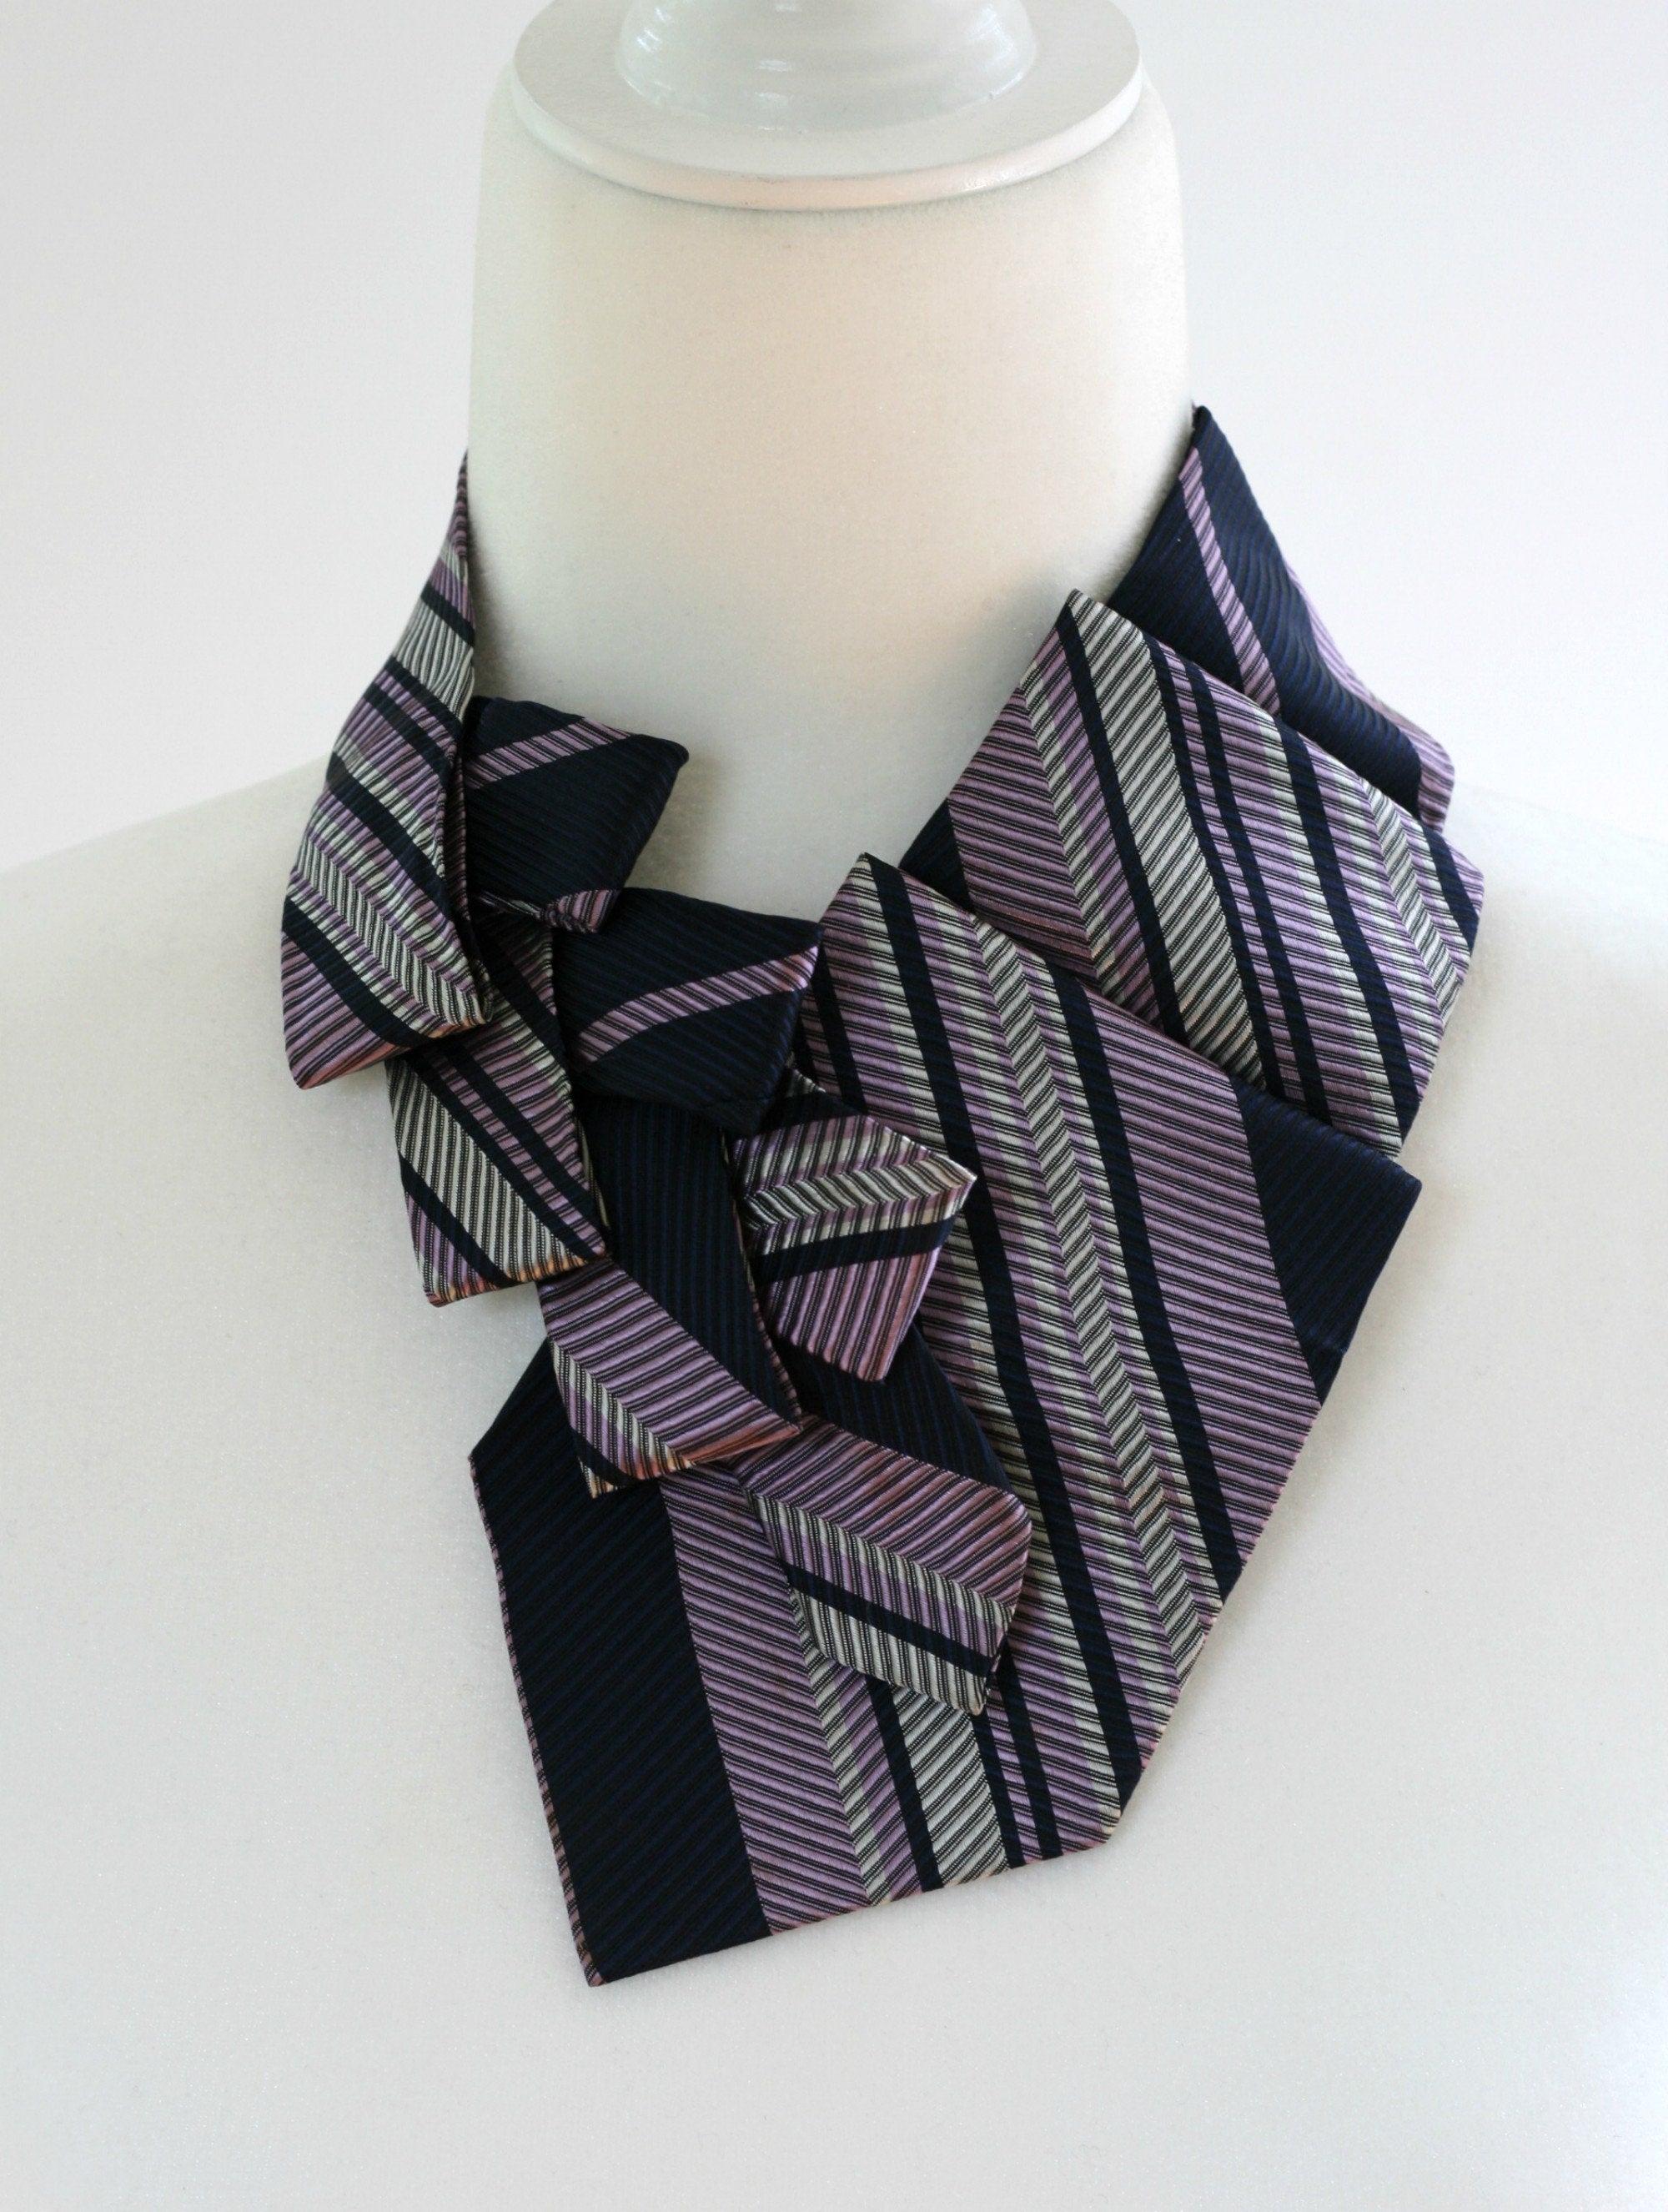 Vintage Scarf Women - Neck Tie Scarf - Striped Scarf - Gift For Daughter - Business Fashion. 71